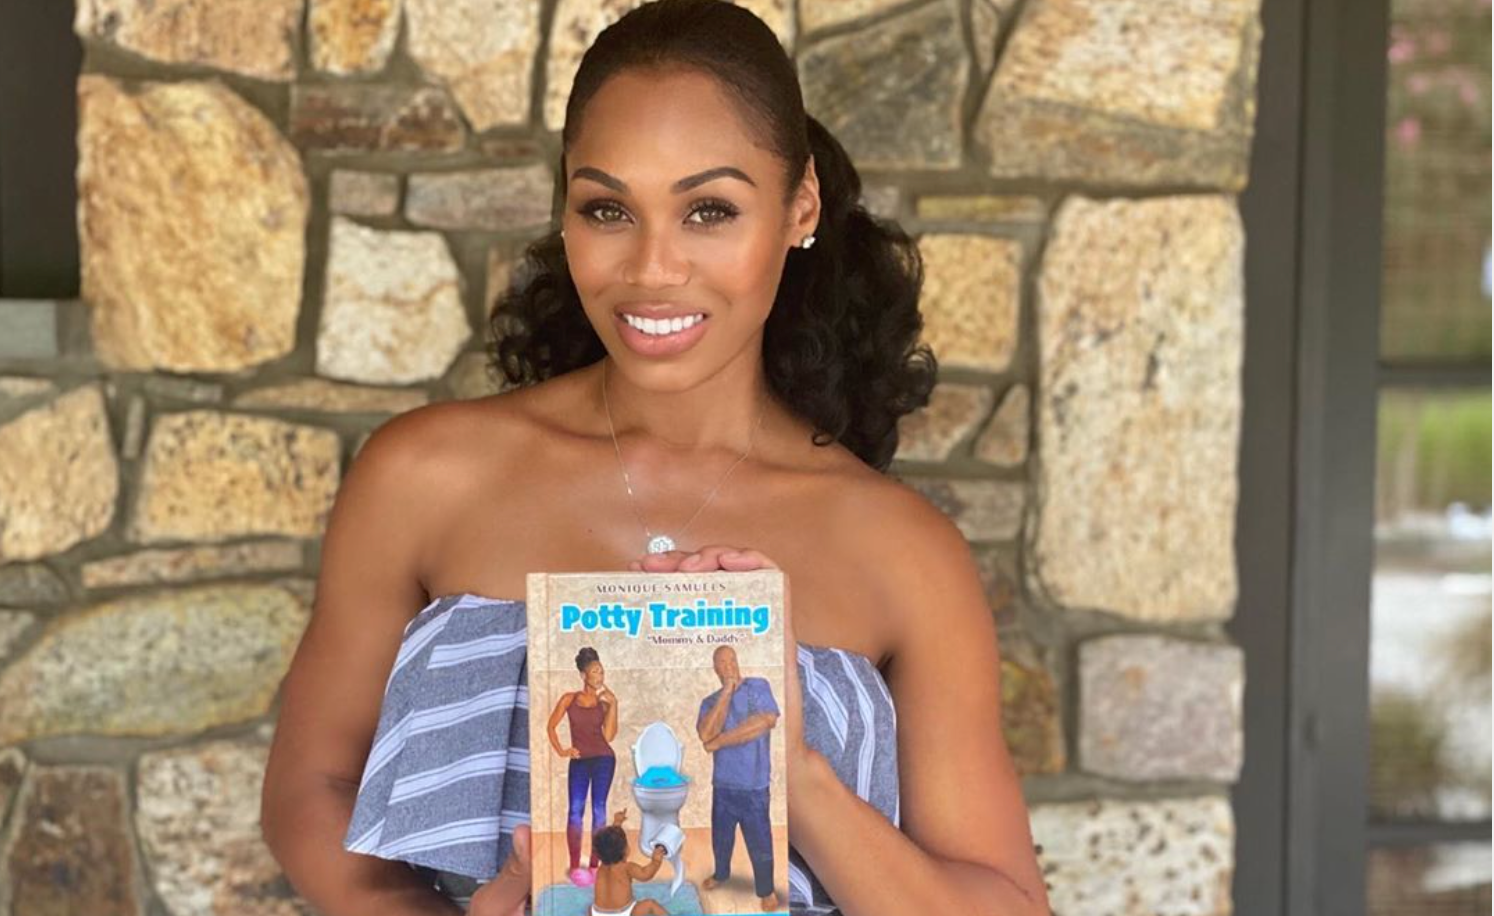 ‘Real Housewives Of Potomac’ Star Monique Samuels Publishes Potty Training Book